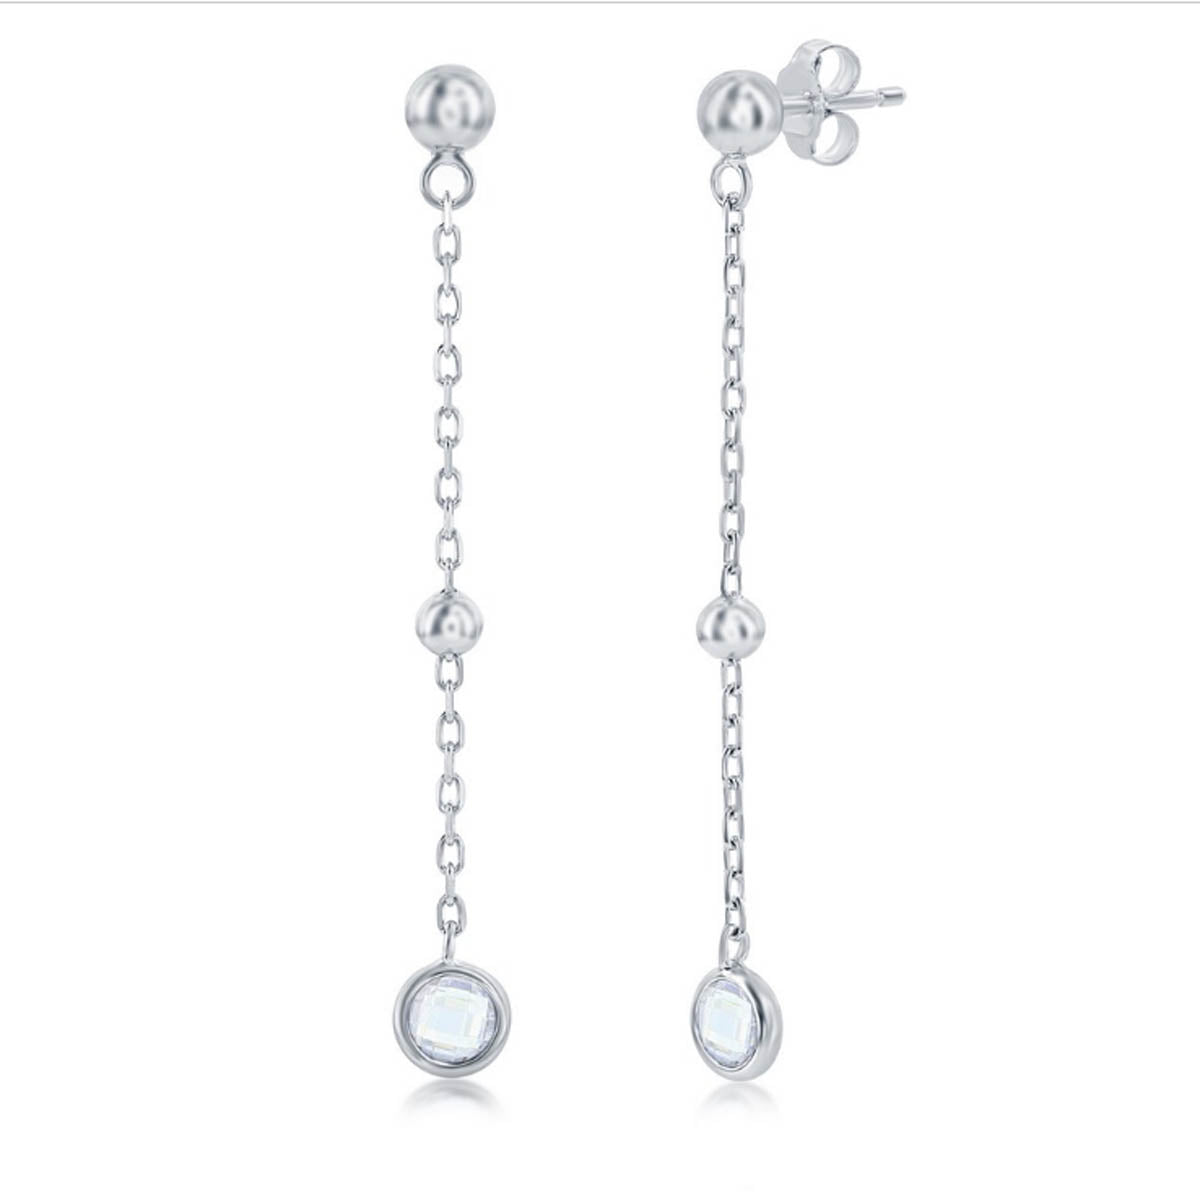 Silver White Crystal Chain Earrings